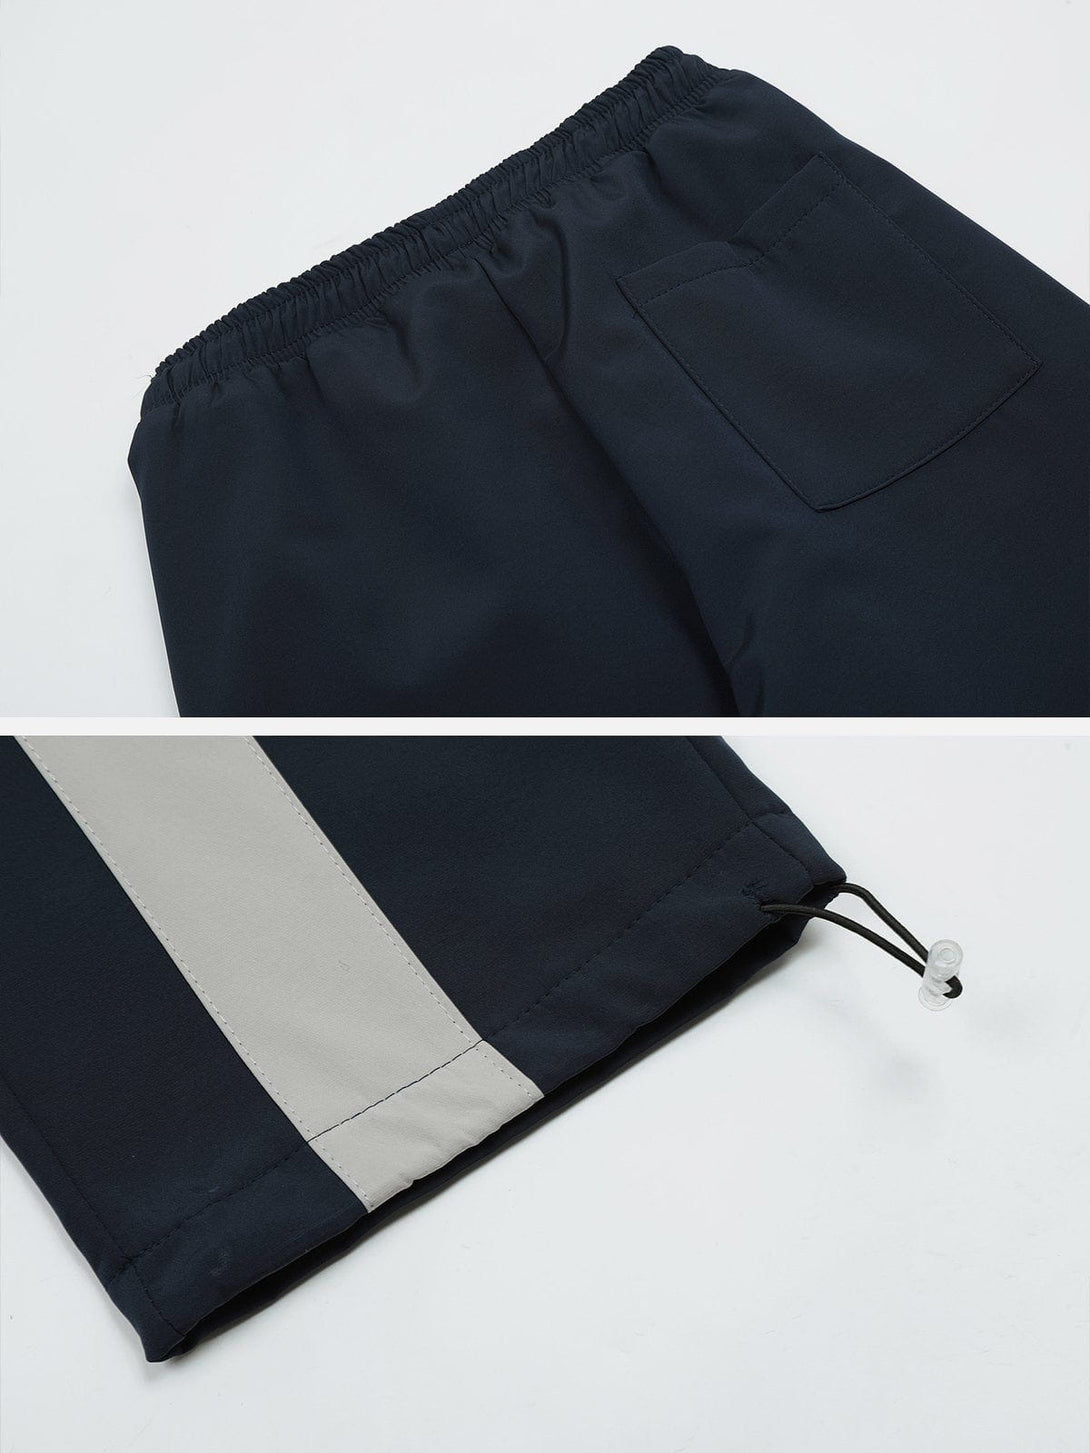 Levefly - Functional Color Contrast Splicing Sweatpants - Streetwear Fashion - levefly.com